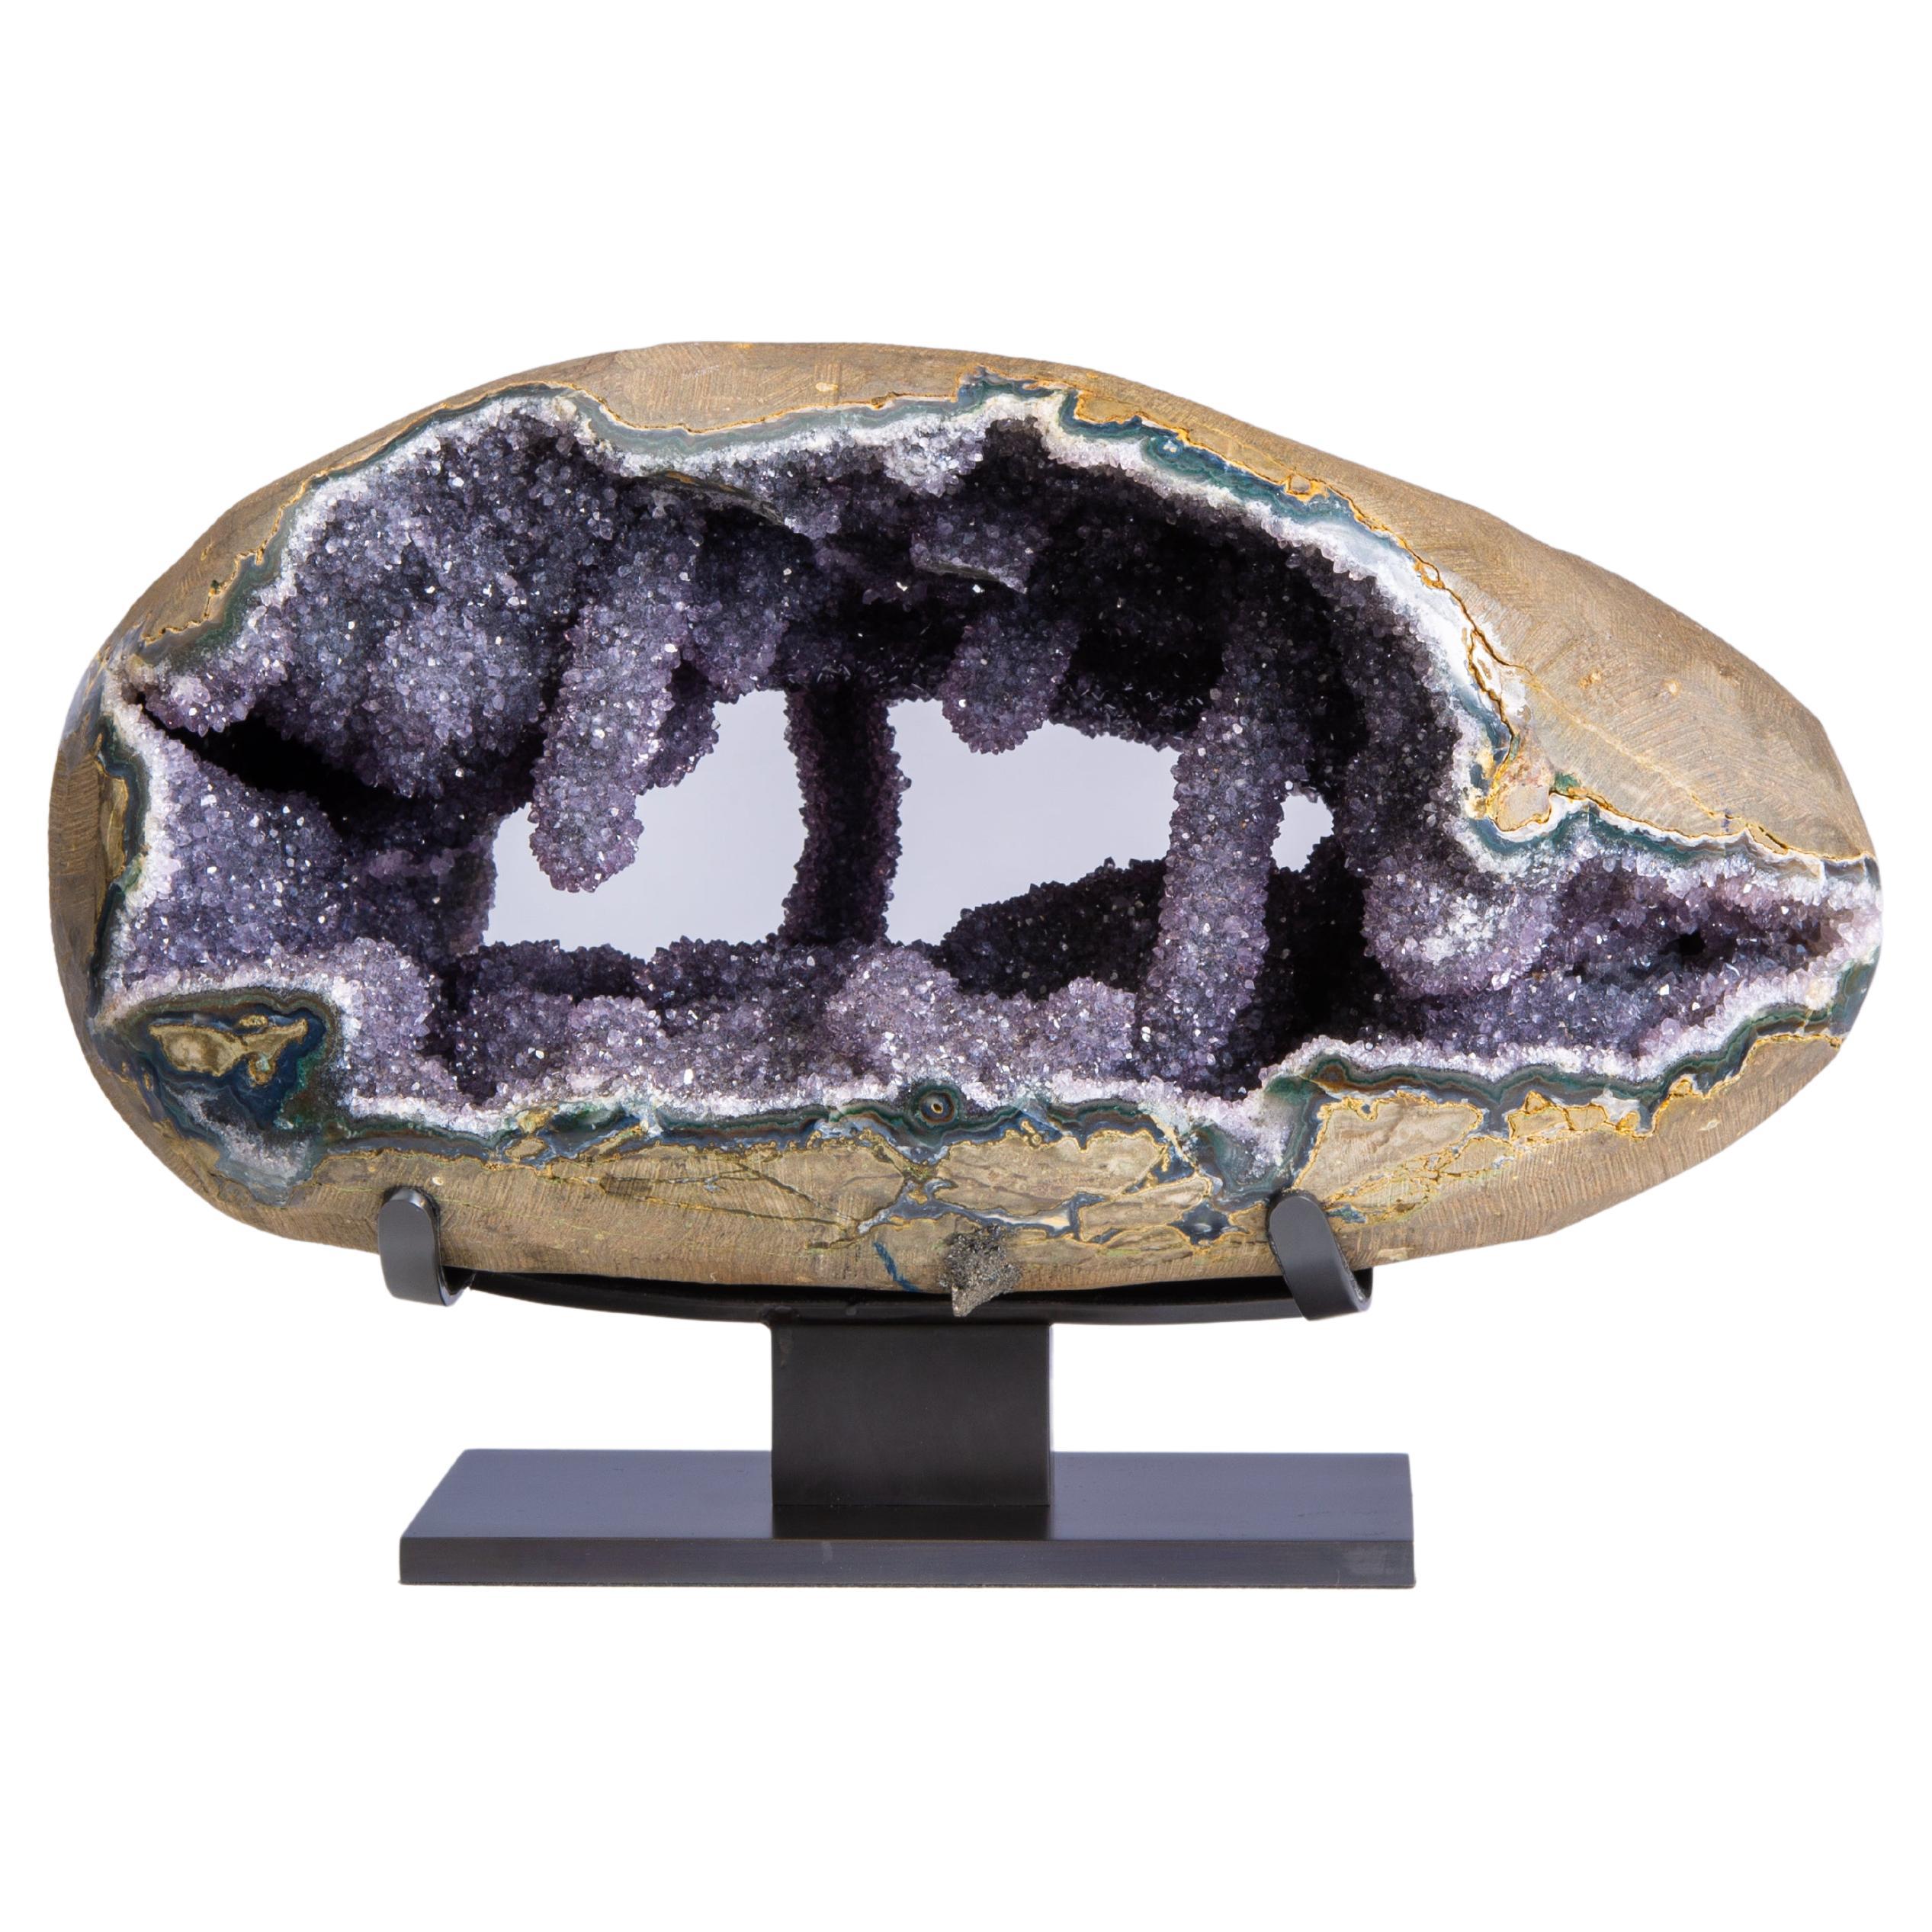 Amazing Geode with Stalactites and Stalagmites with Amethyst and Grey Druze For Sale